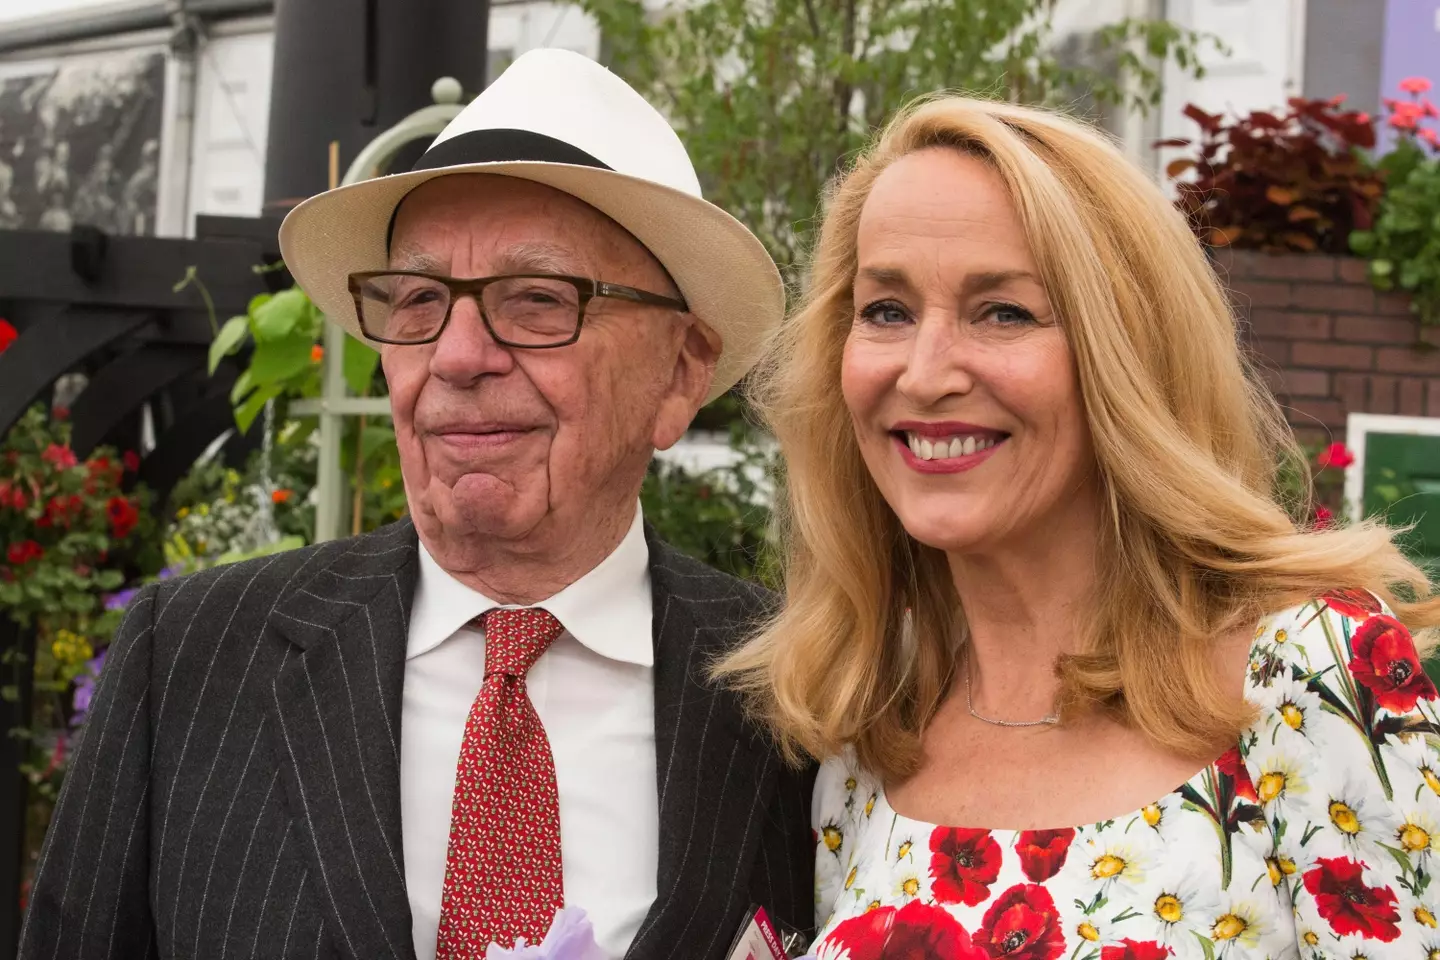 Rupert Murdoch and Jerry Hall were married in March 2016.